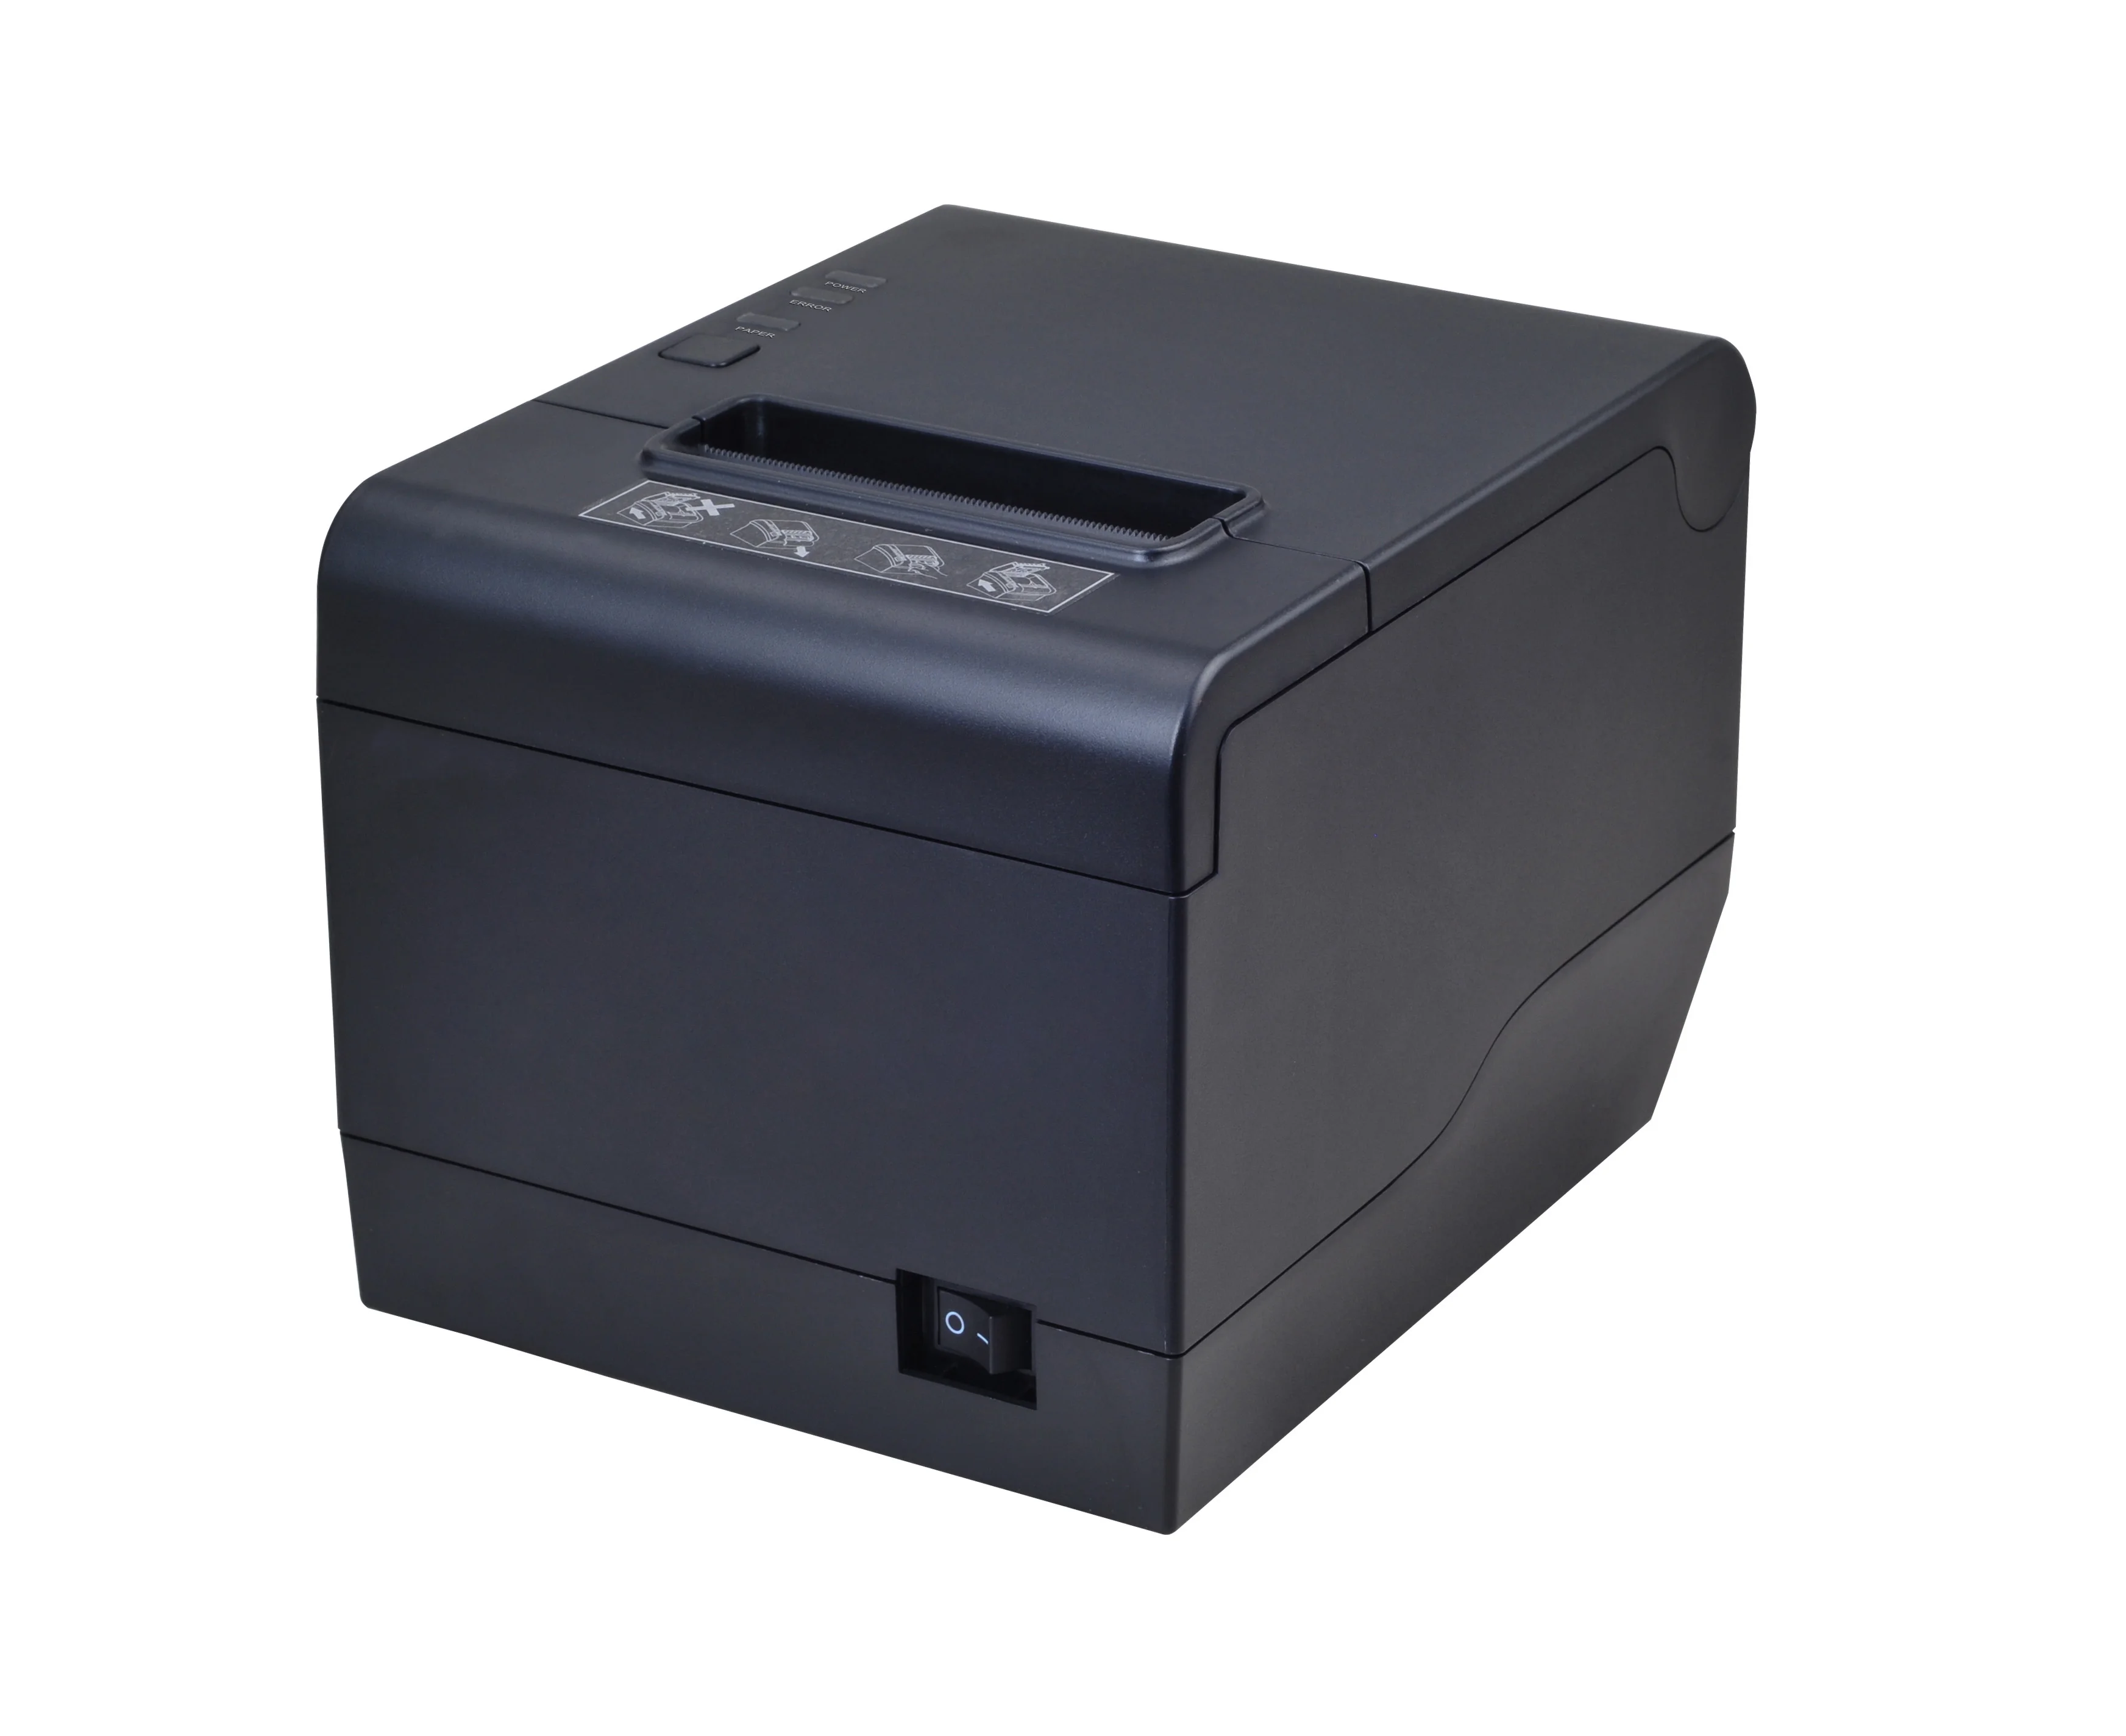 

80mm Multi Language Receipt Thermal Bill Printer with Auto Cutter KR-808 Blue-tooth WIFI Optional, Black color